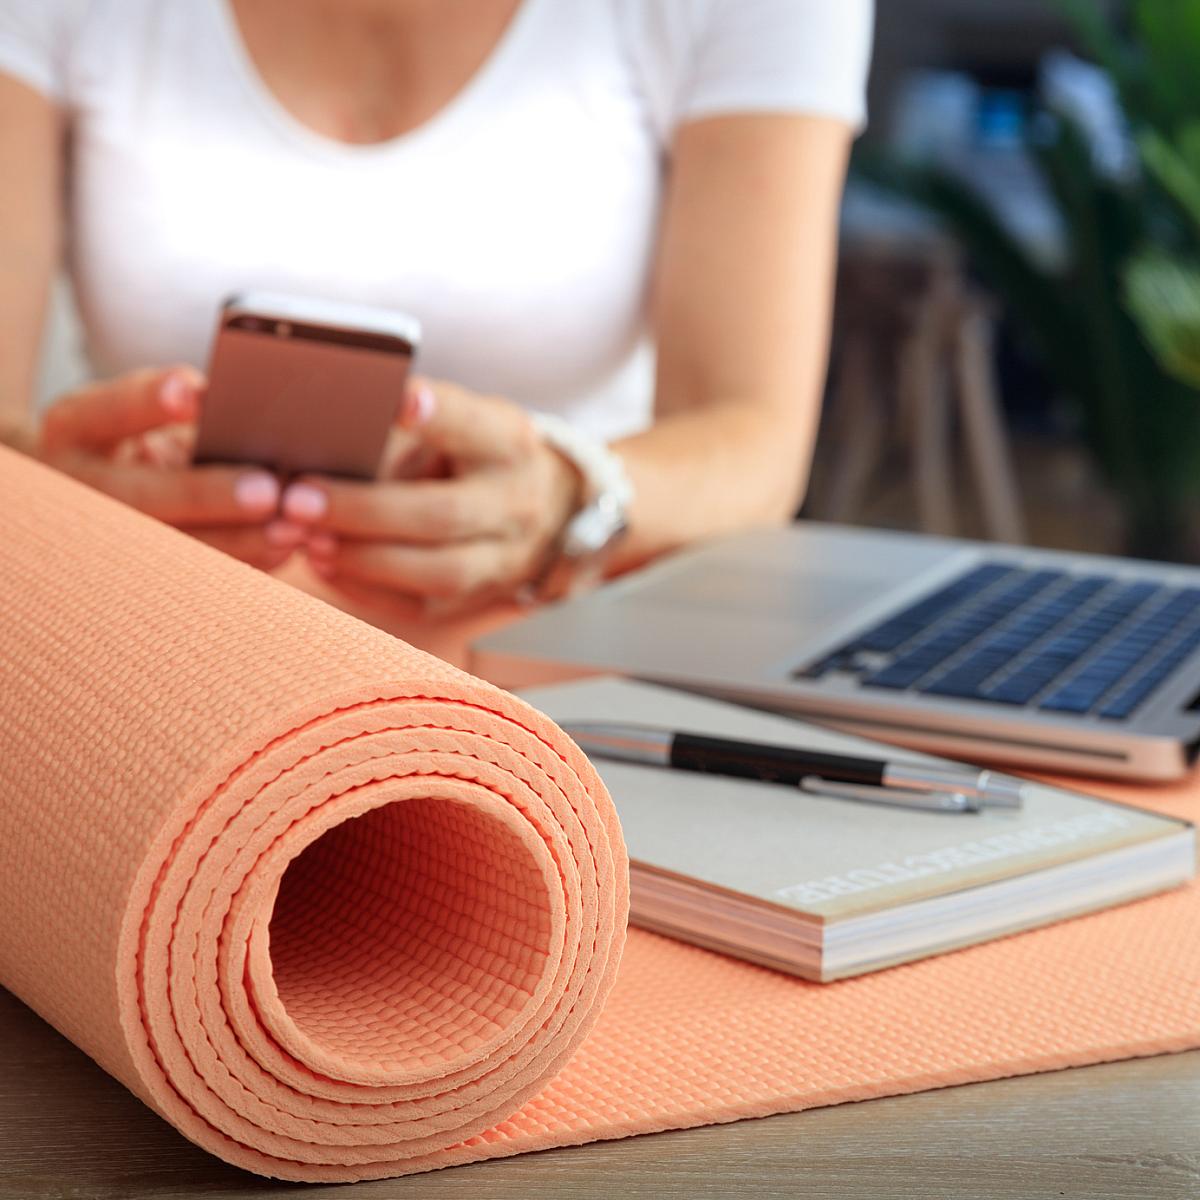 A peach yoga mat rests on a table next to an open laptop. A woman's hands hold a cell phone in the background.